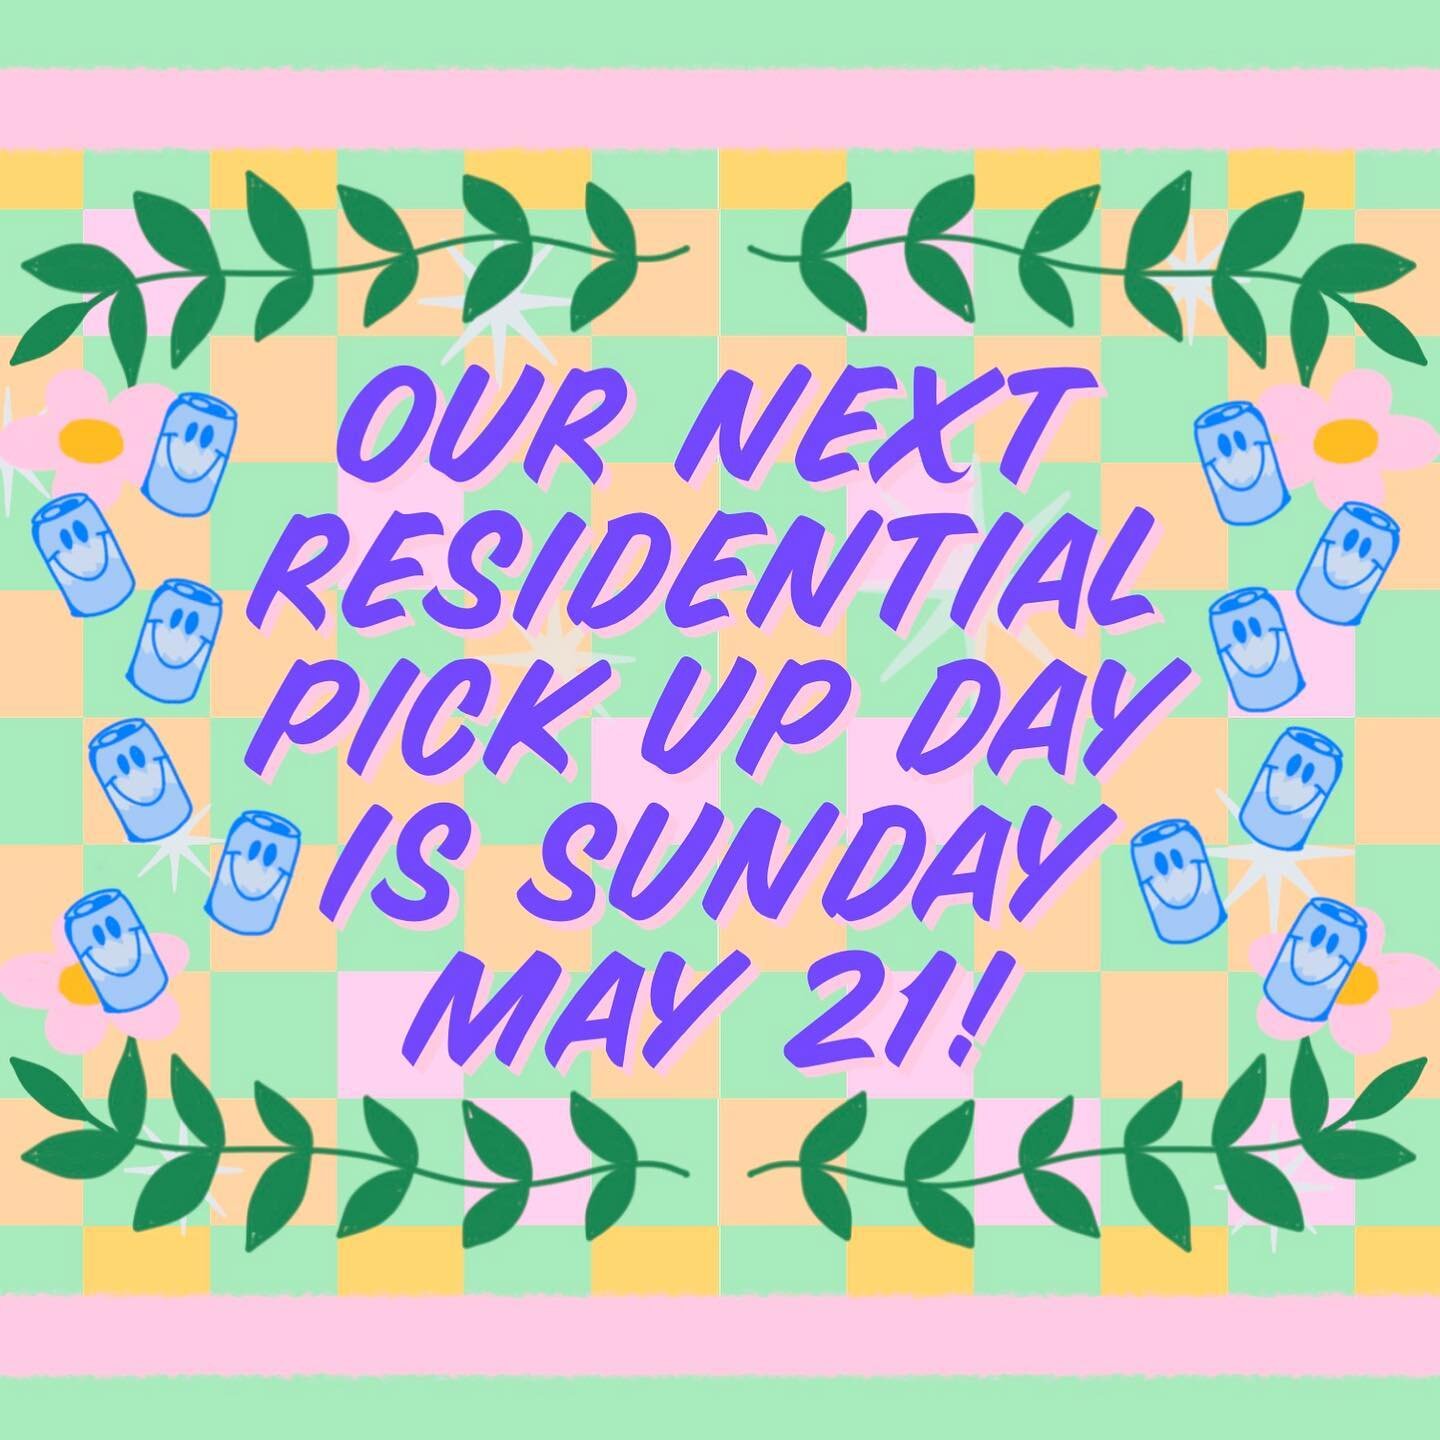 Our next residential pick up day is Sunday May 21st! ✨If you want to sign up for pick-ups, subscriptions are sliding scale $2-$10 via Patreon (link in bio). ✨There is more info about our pick-ups in the pinned post on our feed 💕 Our May volunteer si